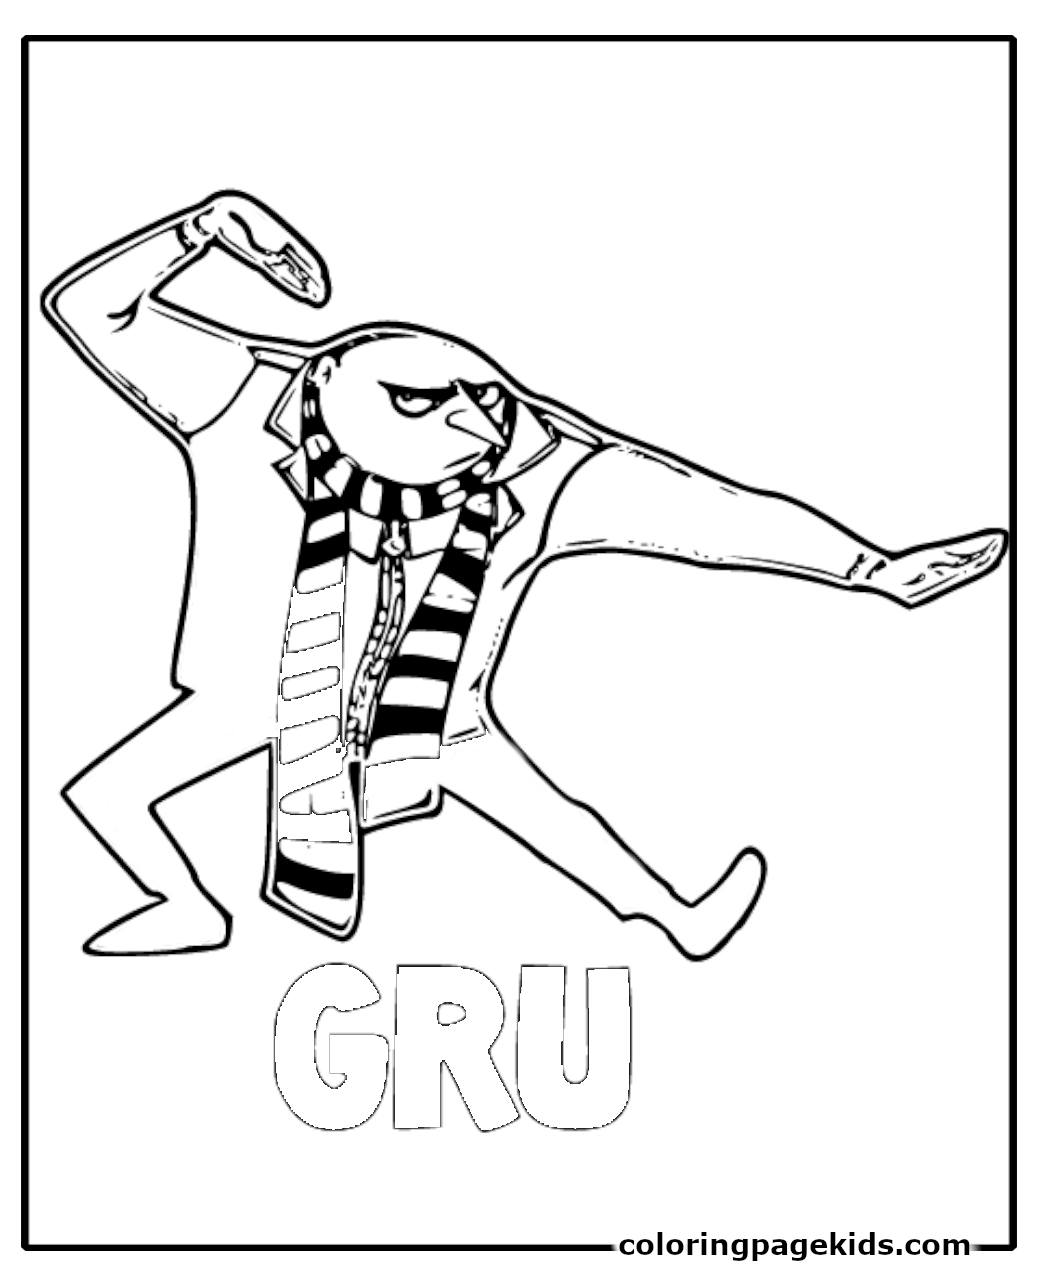 gru-coloring-pages